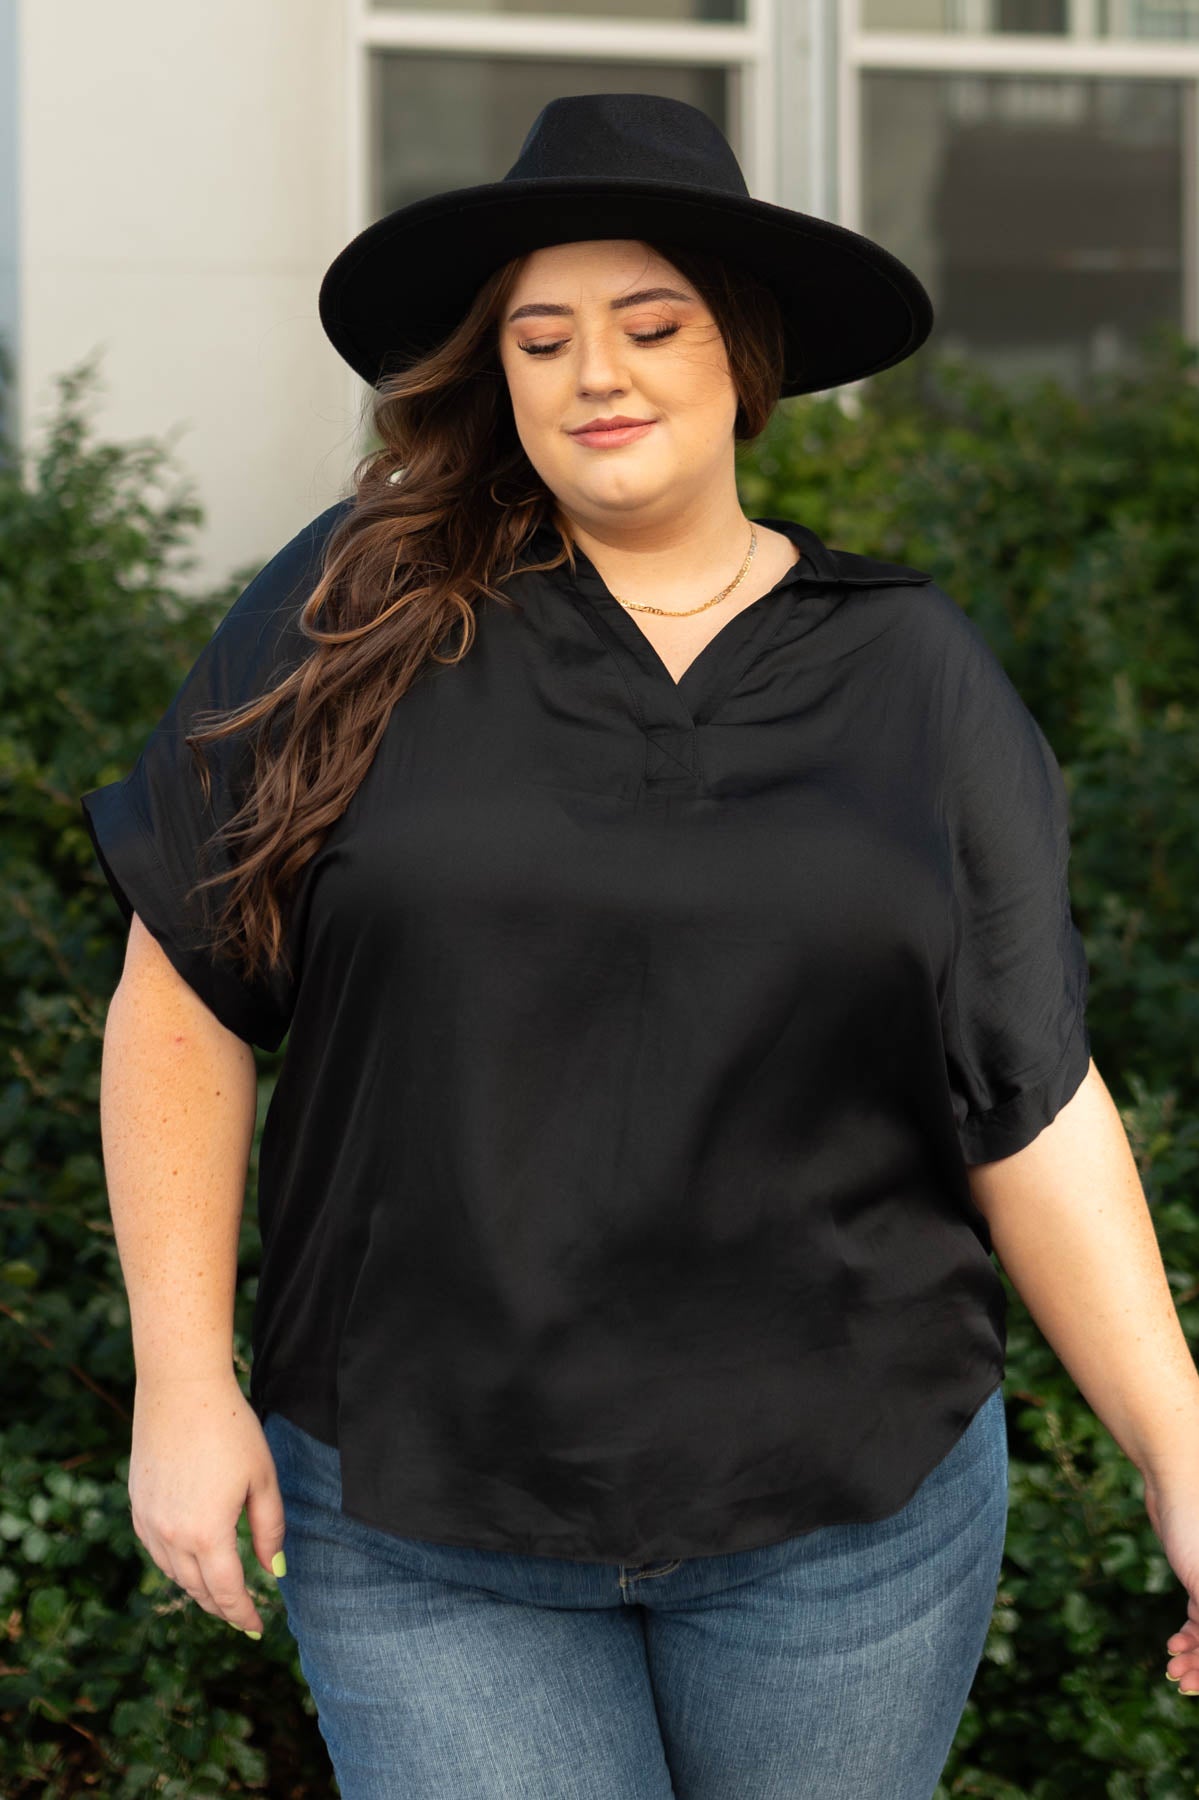 Short sleeve plus size black top with v-neck and collar